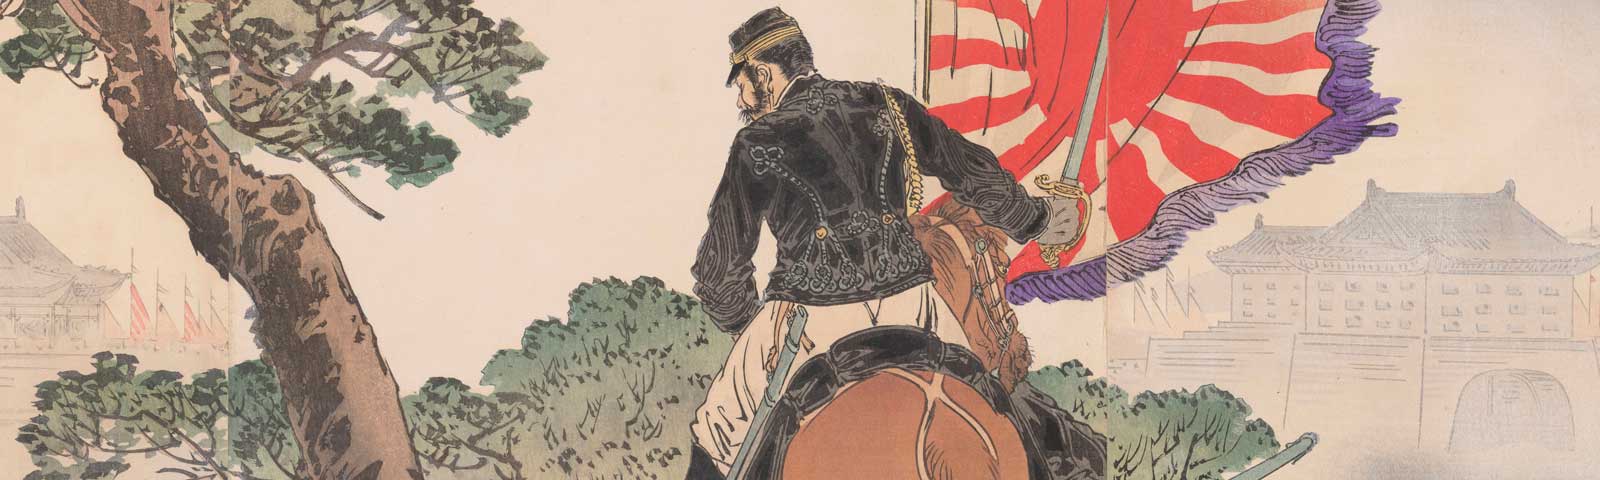 woodblock print showing a tree, uniformed soldier sitting on a horse, holding a flag